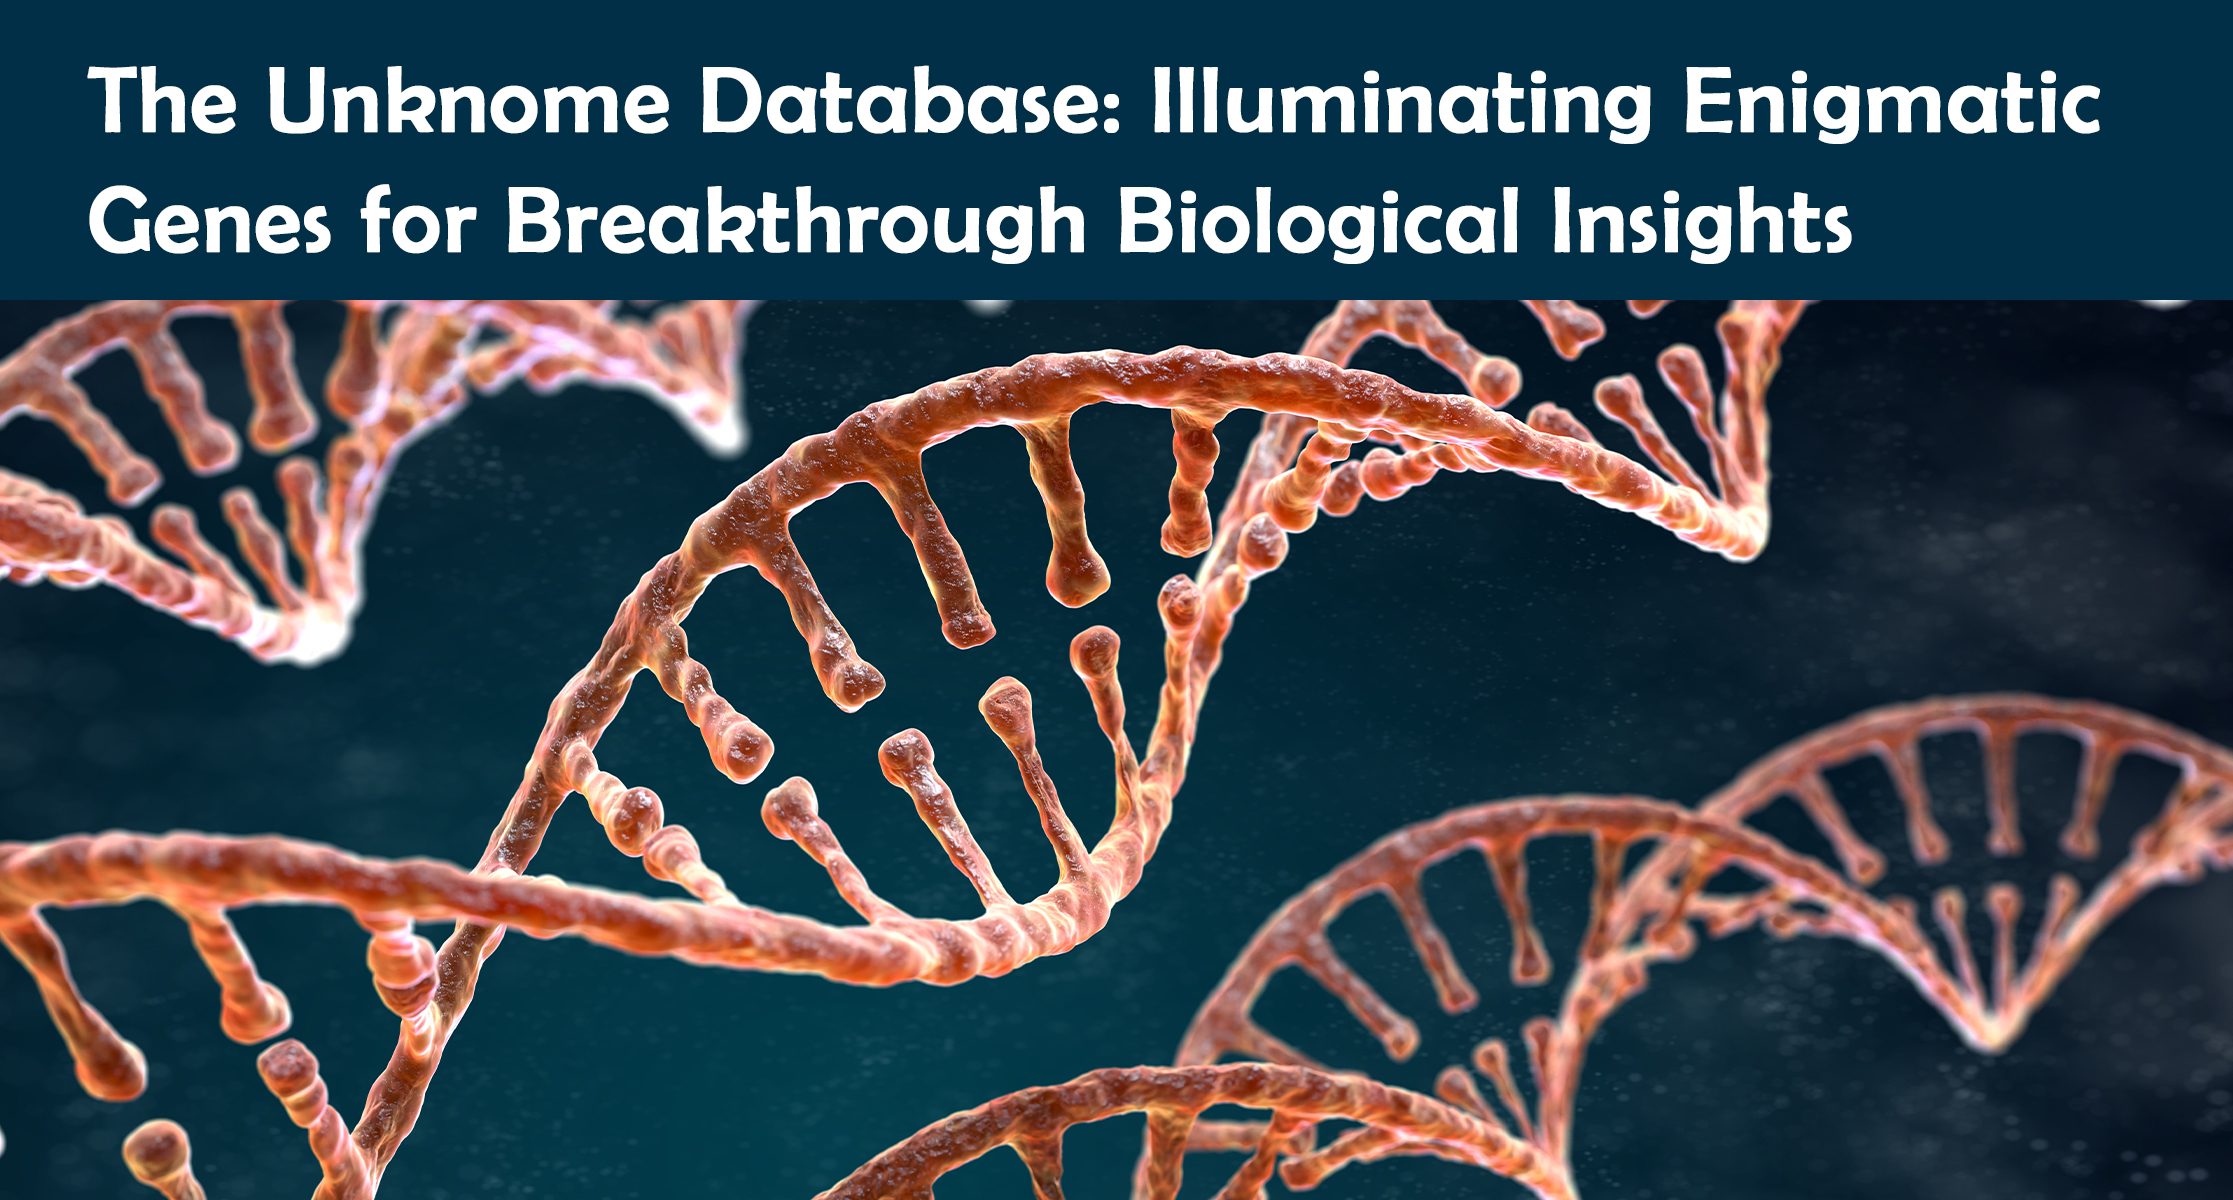 The Unknome Database: Illuminating Enigmatic Genes for Breakthrough Biological Insights